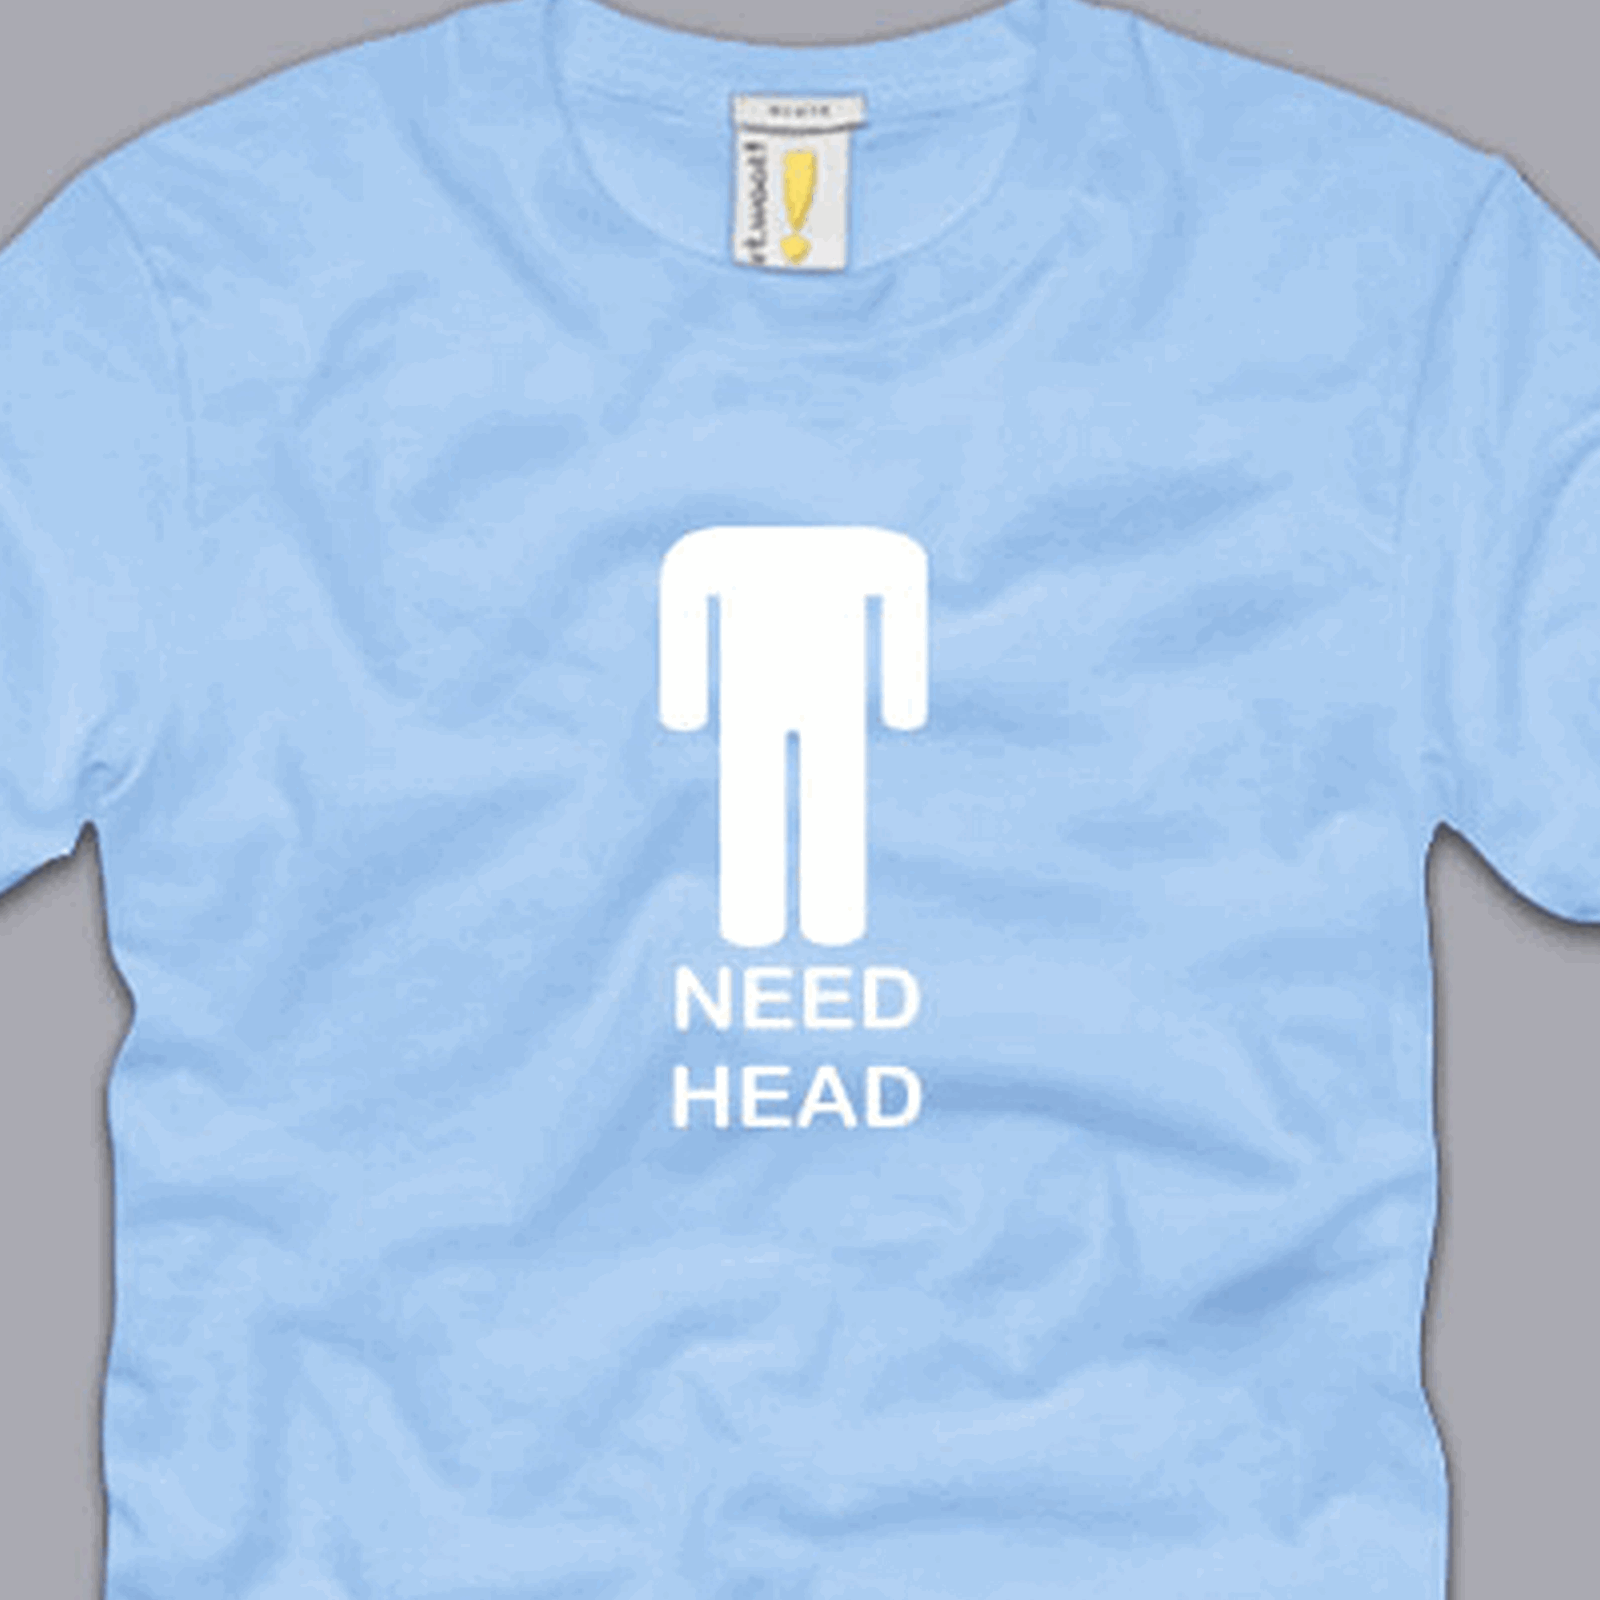 Need Head S M L Xl 2xl 3xl T Shirt Funny Awesome Sex Crude Rude Adult